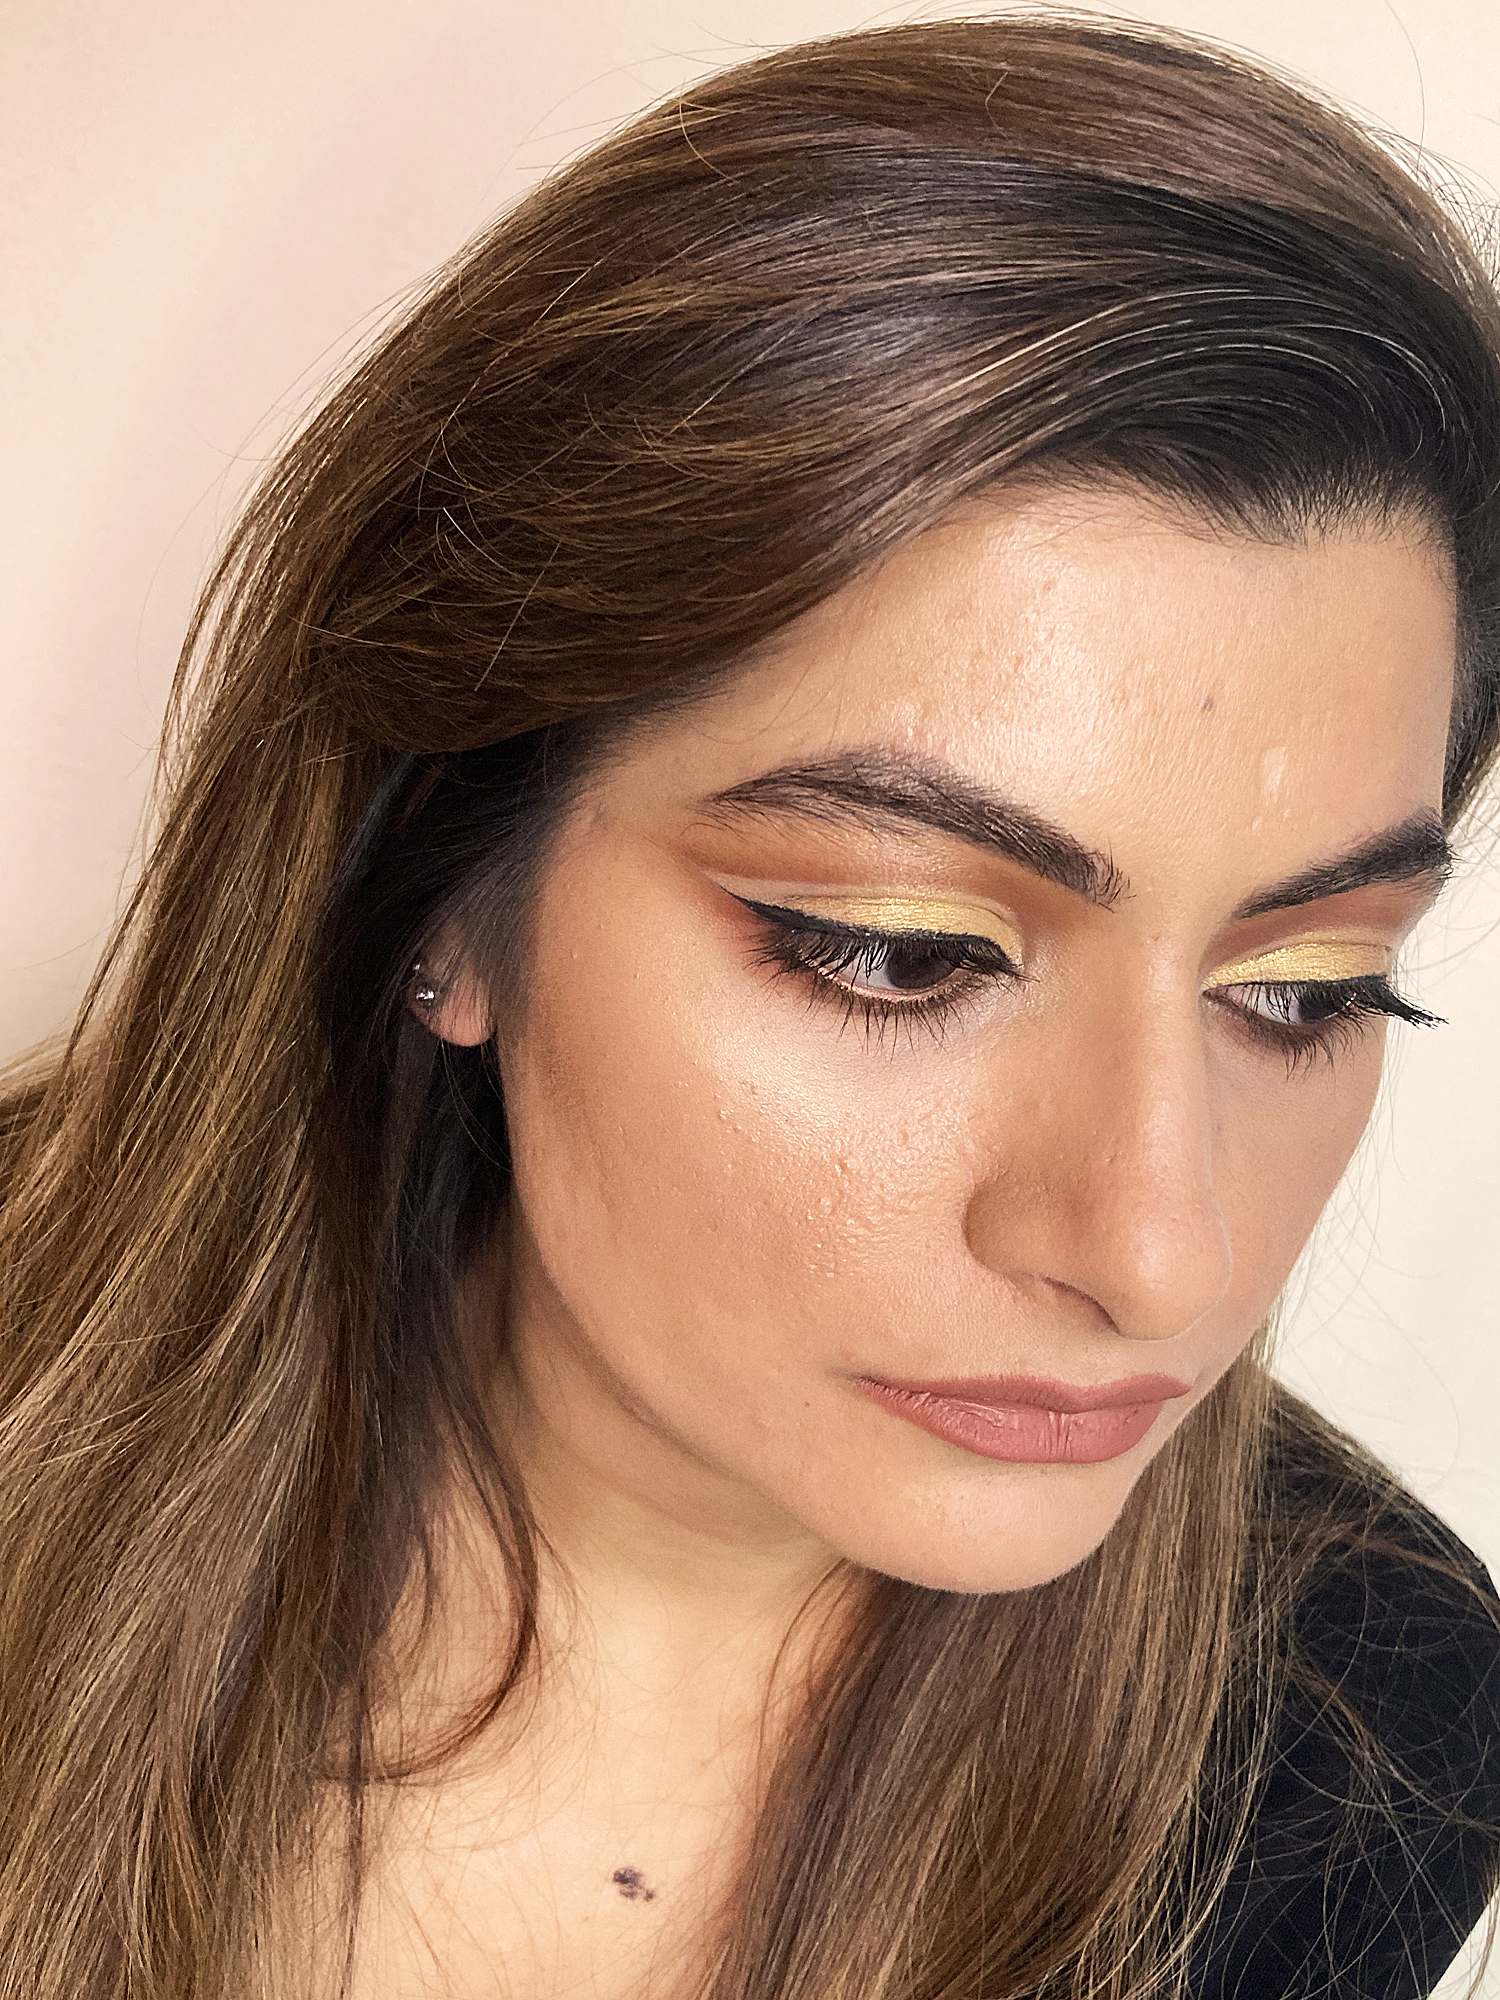 FOTD #4 - My First Ever Cut Crease! (3)